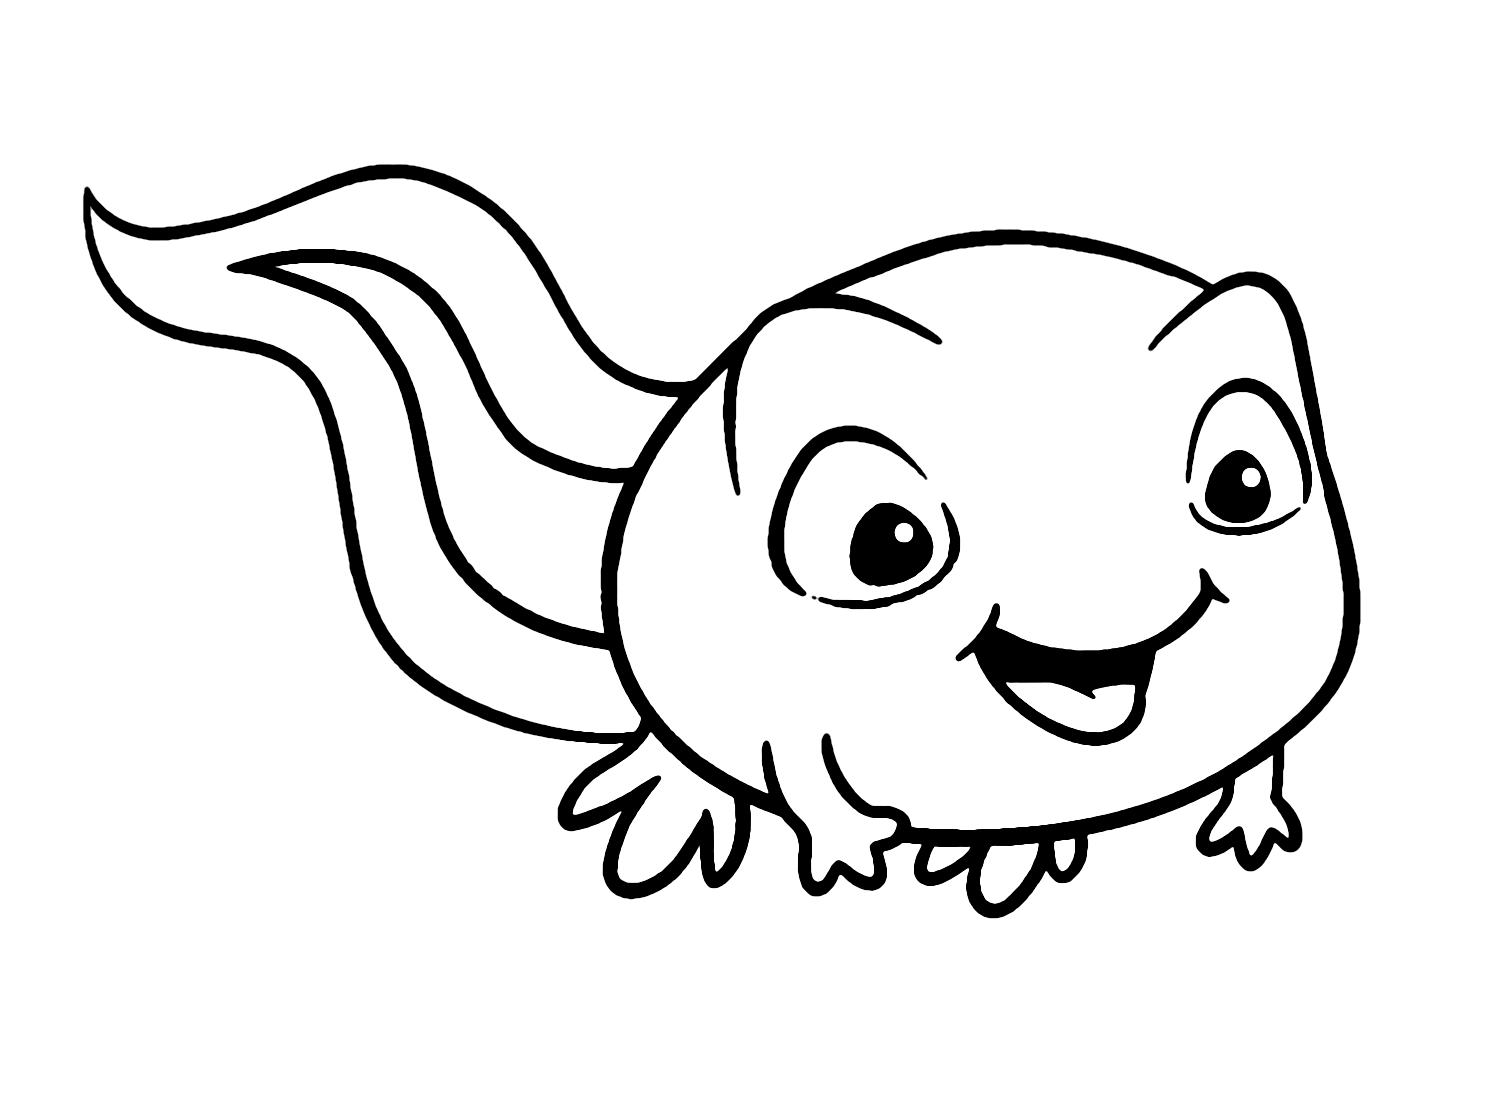 Tadpole Coloring Pages Printable for Free Download